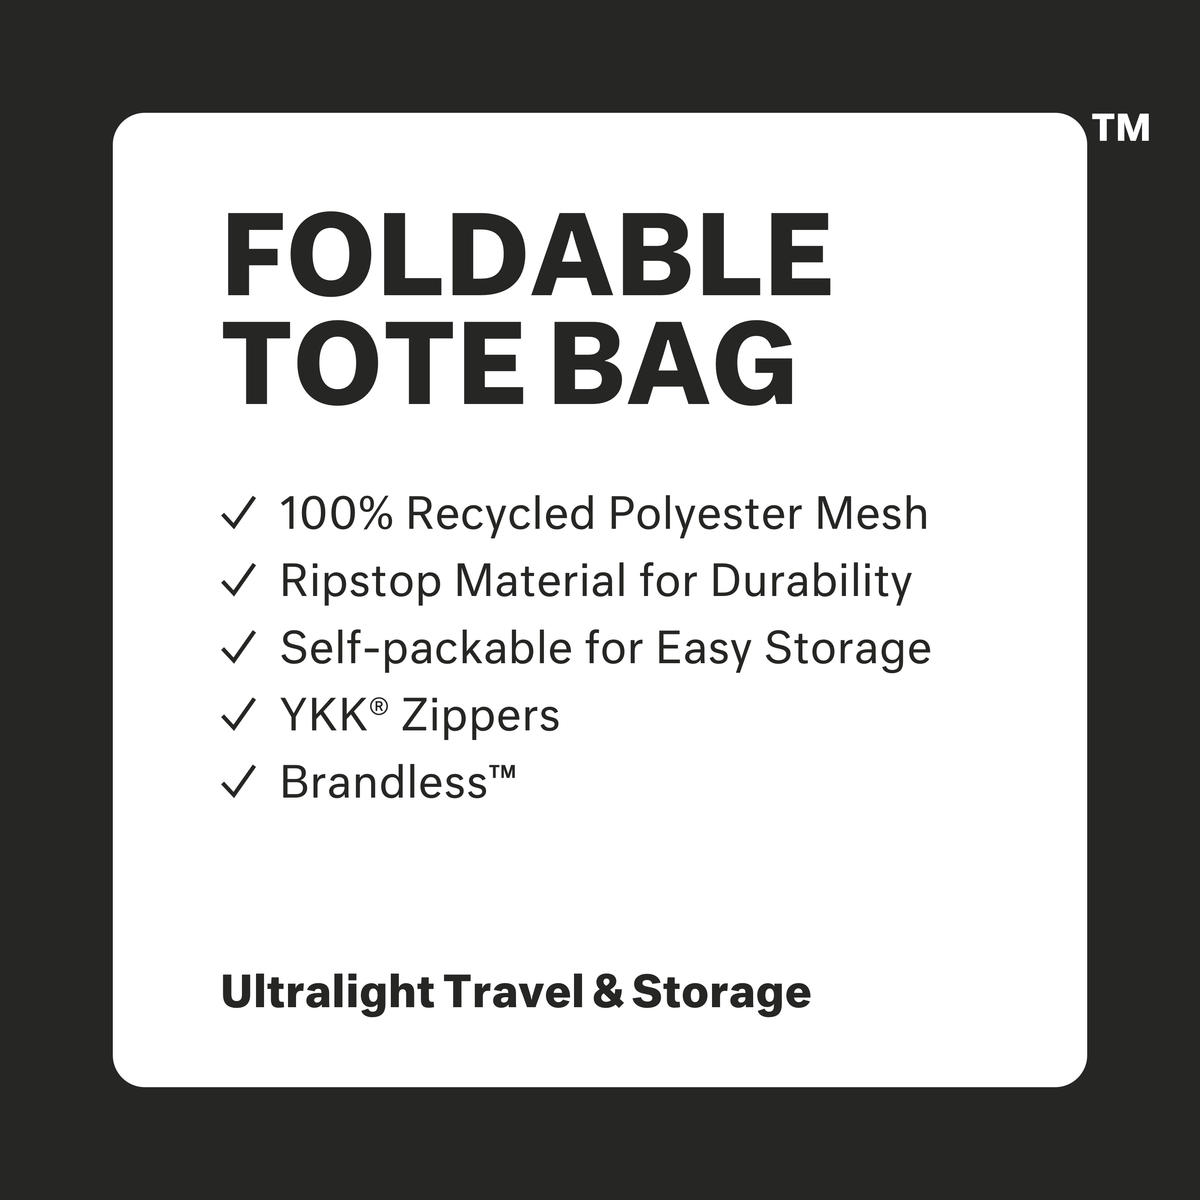 Foldable tote bag: 100% recycled polyester mesh, Ripstop material for durability, self-packacble for easy storage. YKK Zippers. Brandless. Ultralight travel and storage.